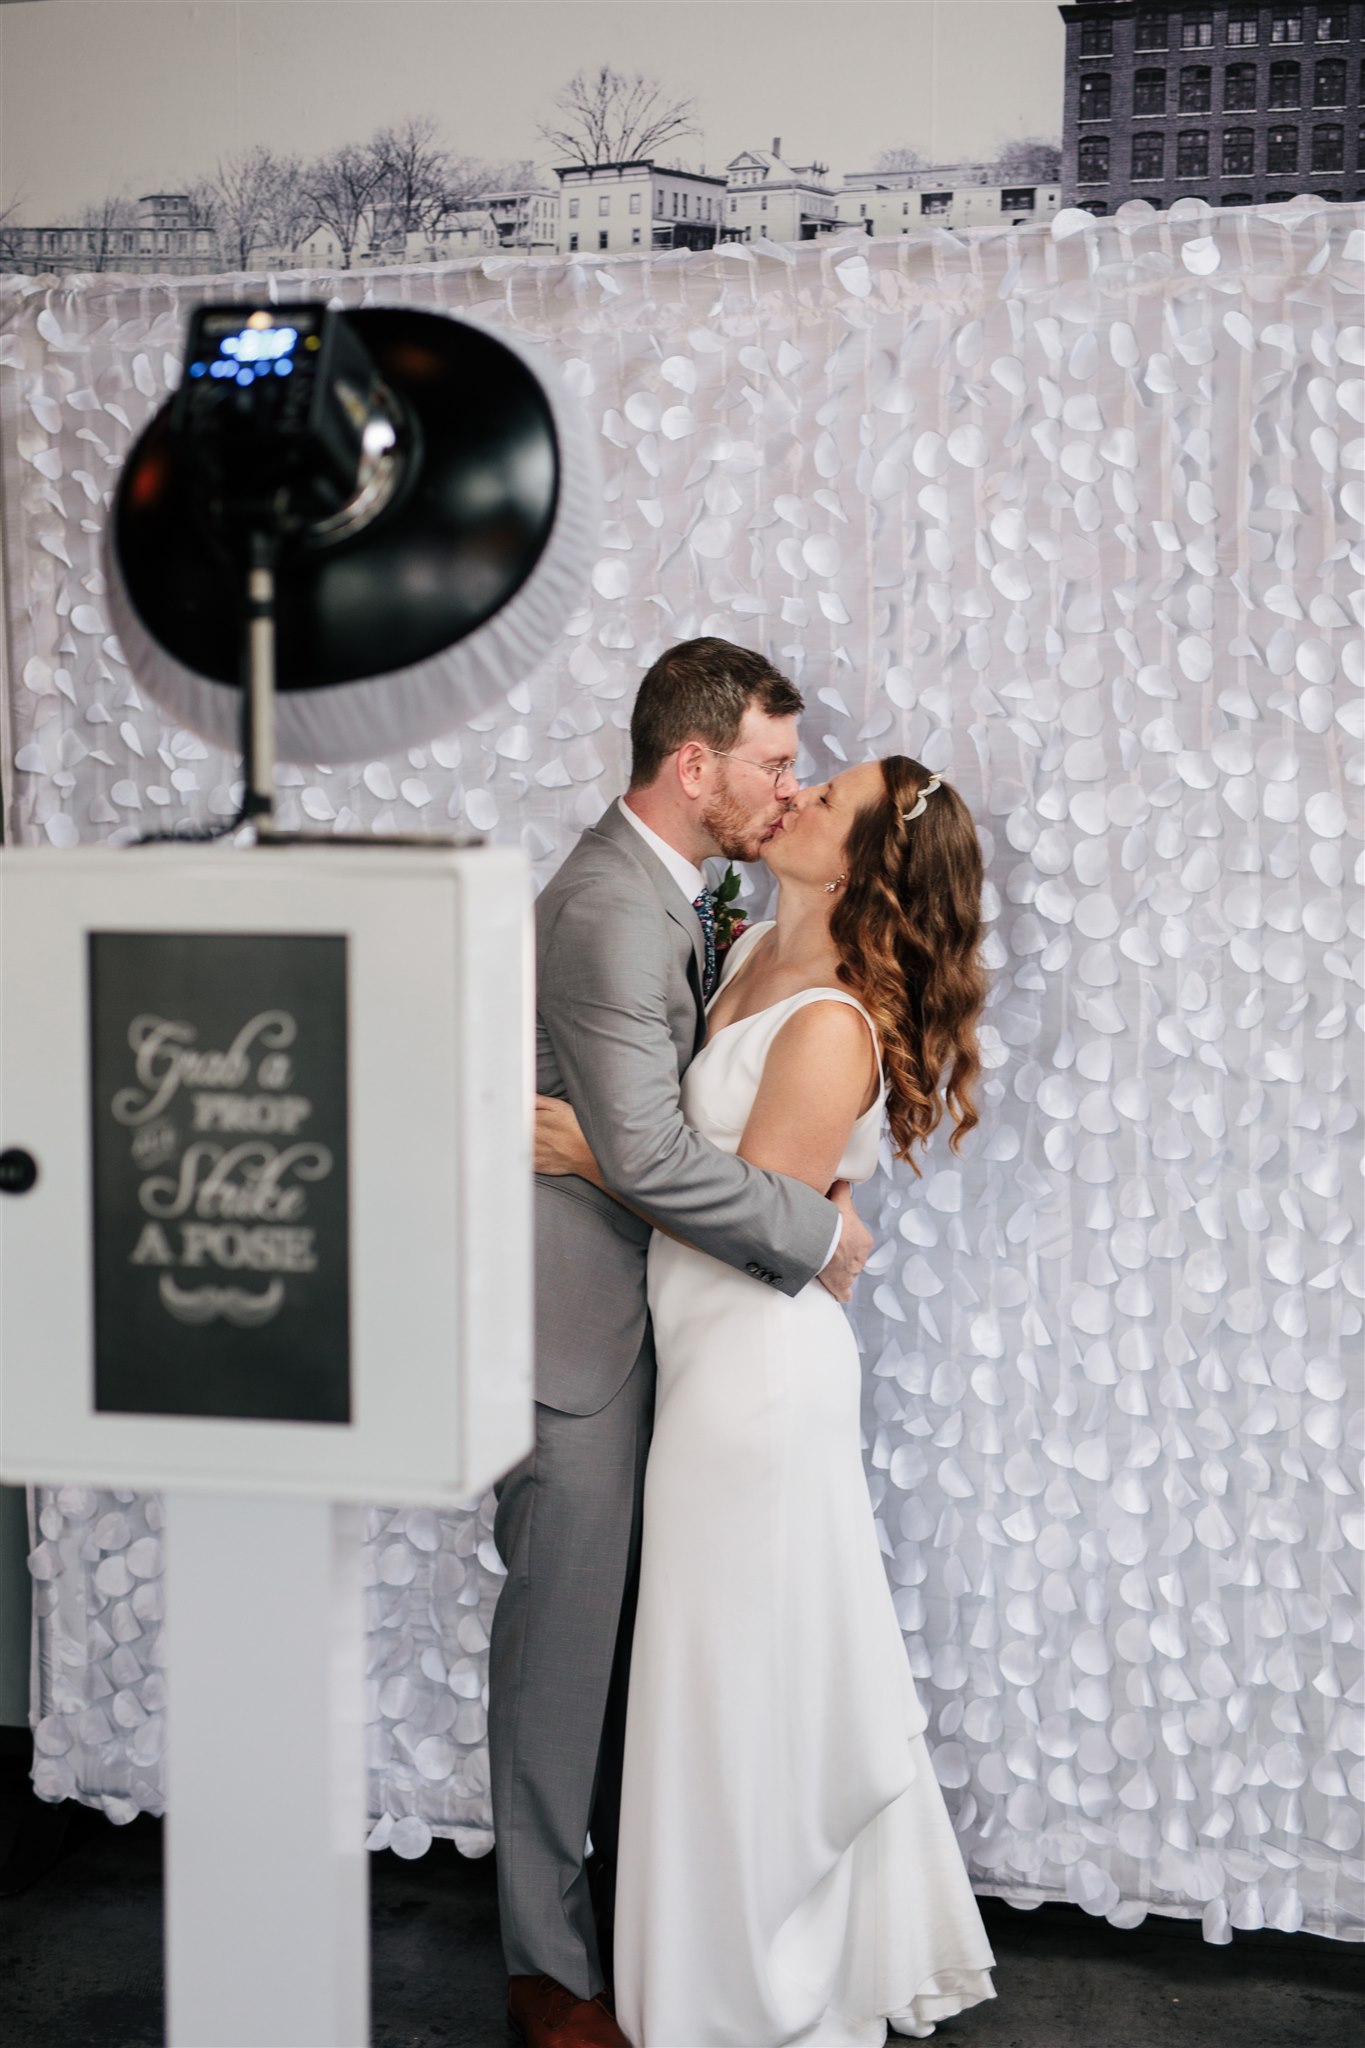 wedding couple kisses in front of the backdrop of the wedding photo booth